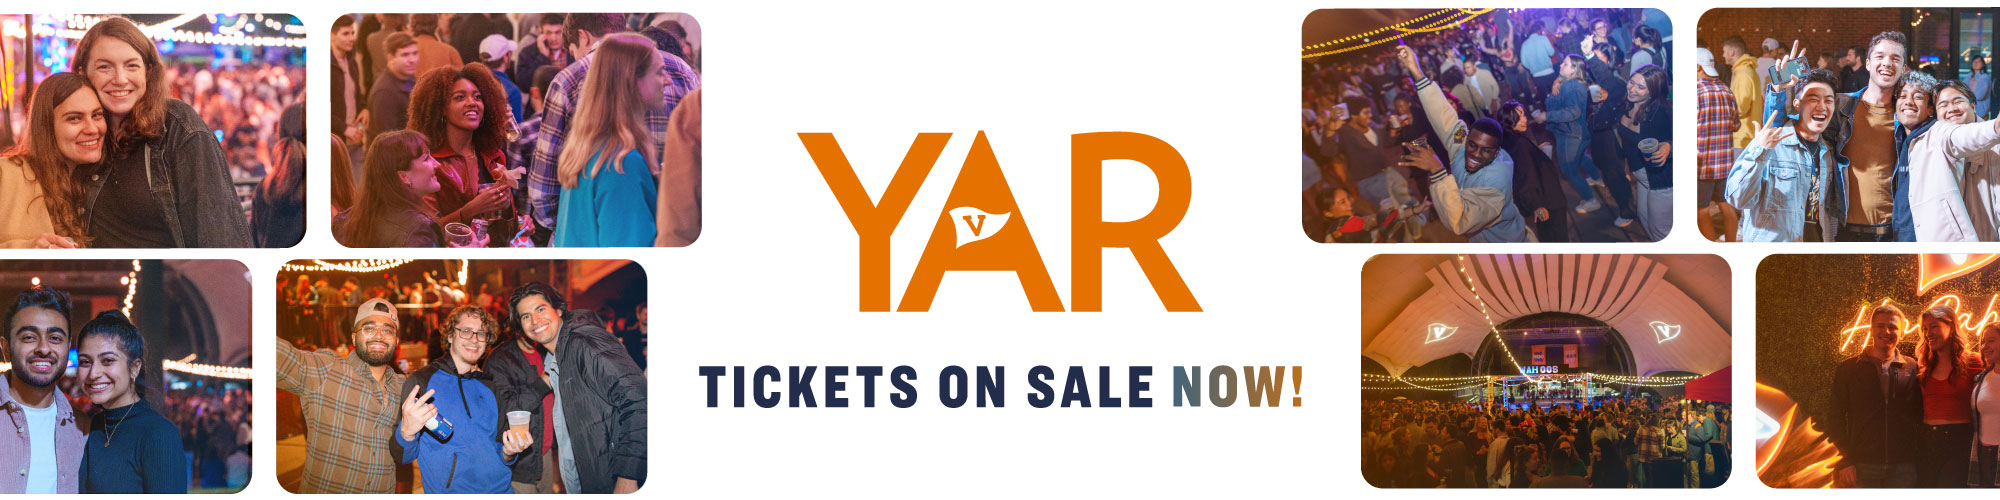 YAR Tickets On Sale Now!